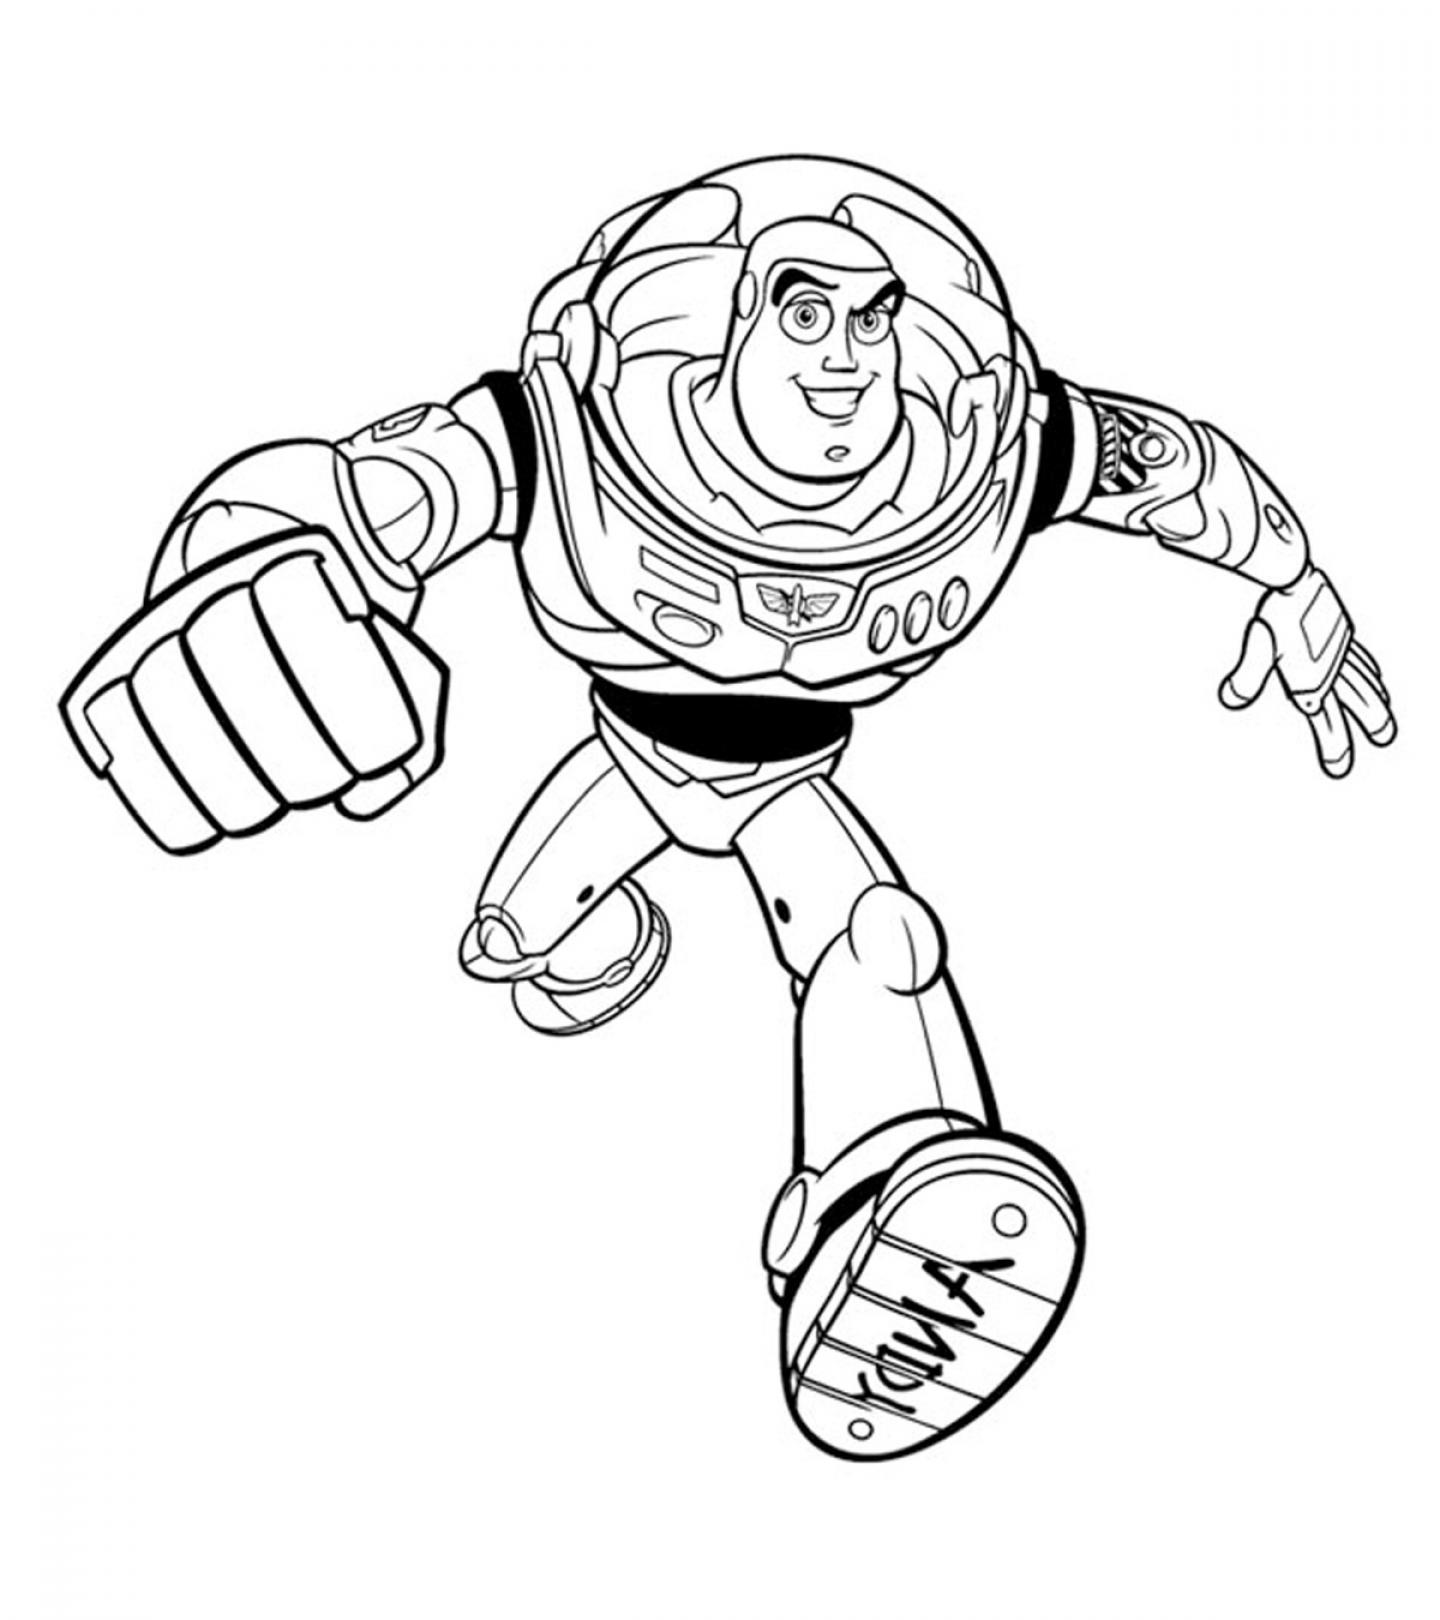 Toy Story coloring book on the go to print and online - SheetalColor.com